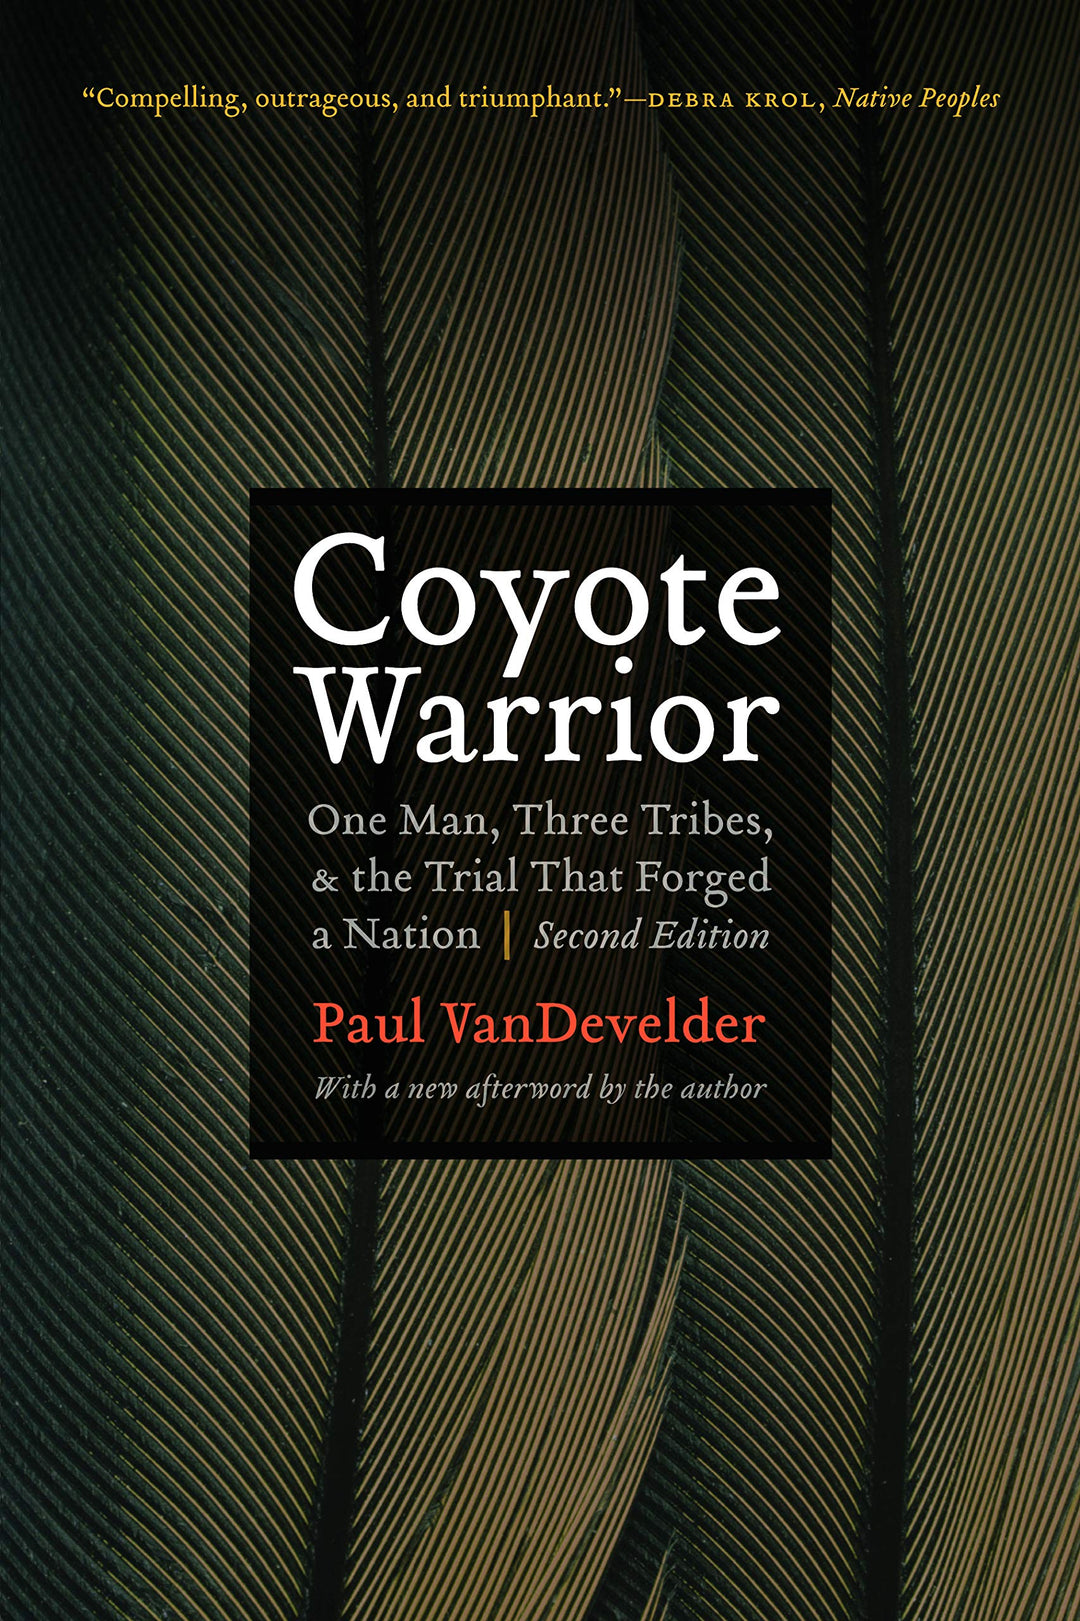 Coyote Warrior: One Man, Three Tribes, and the Trial That Forged a Nation by Paul VanDevelder